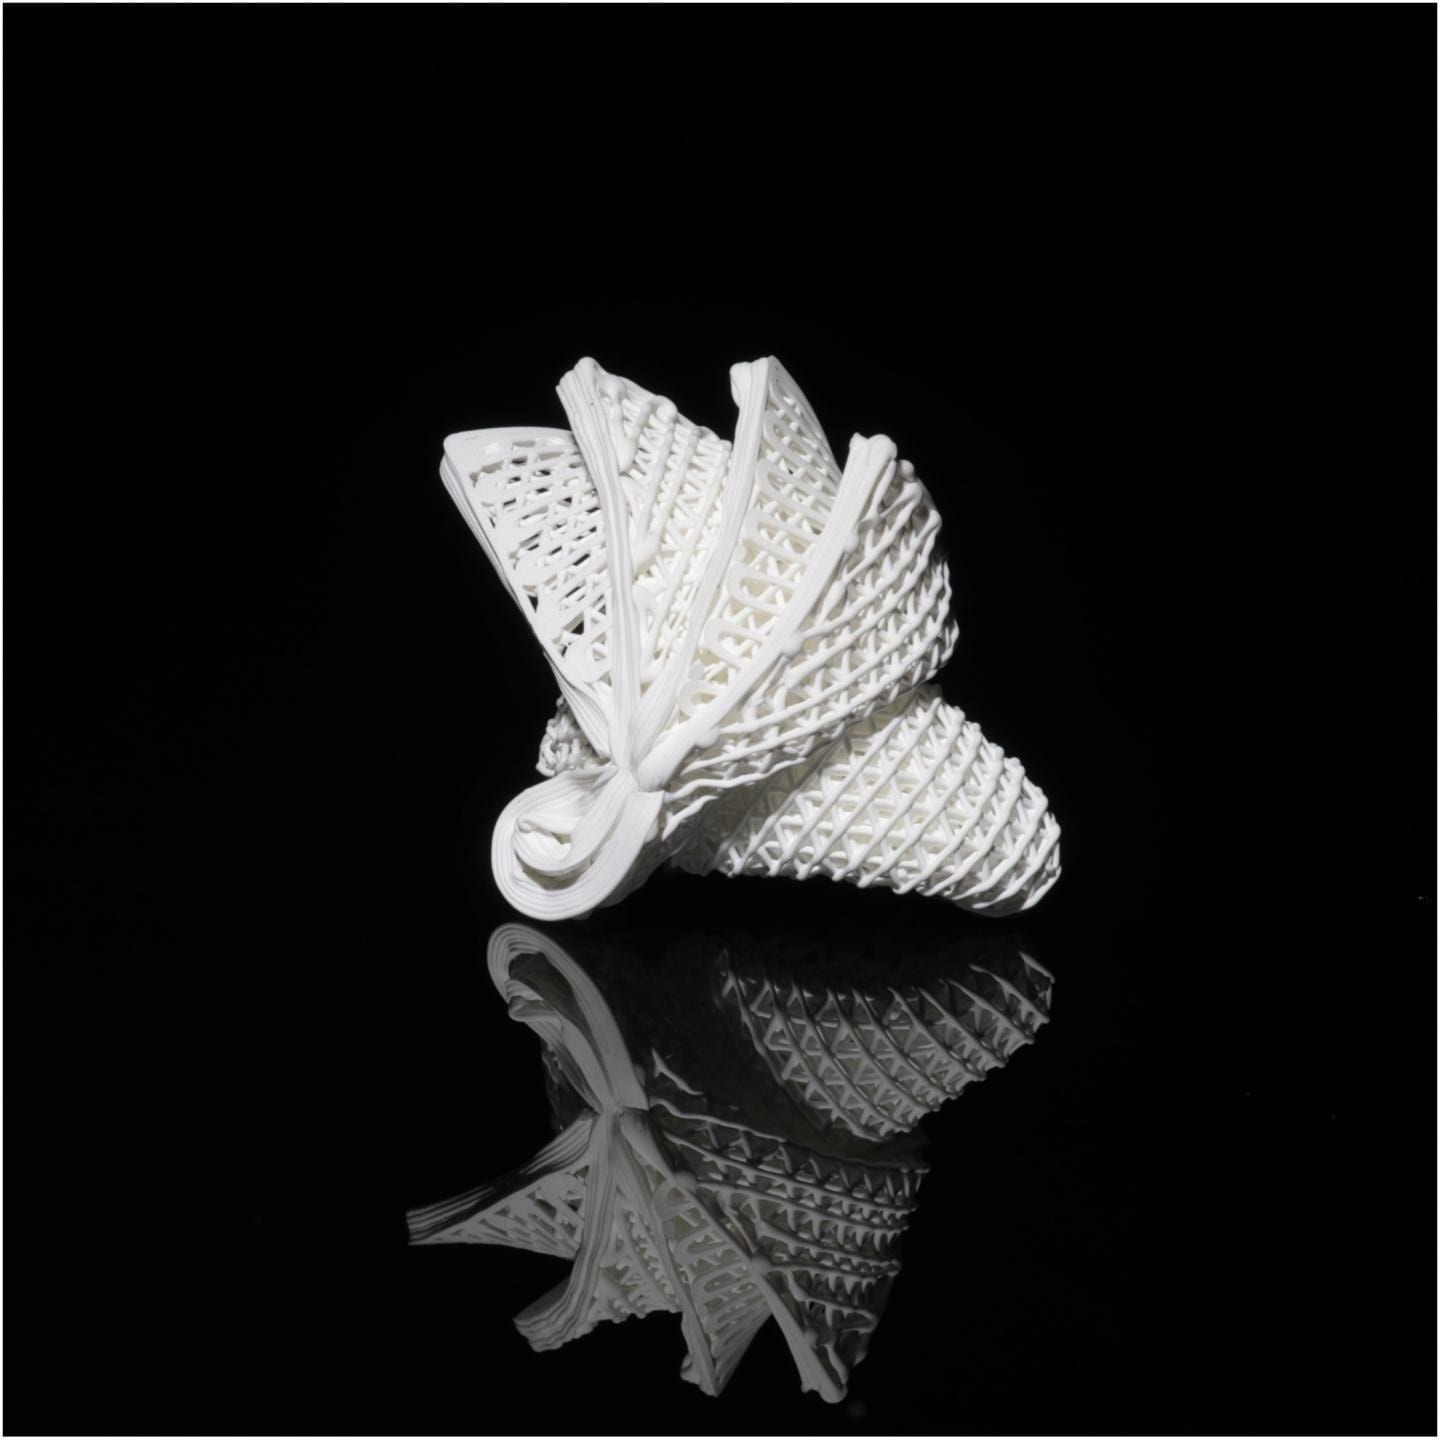 World's first-ever 4D printing for ceramics